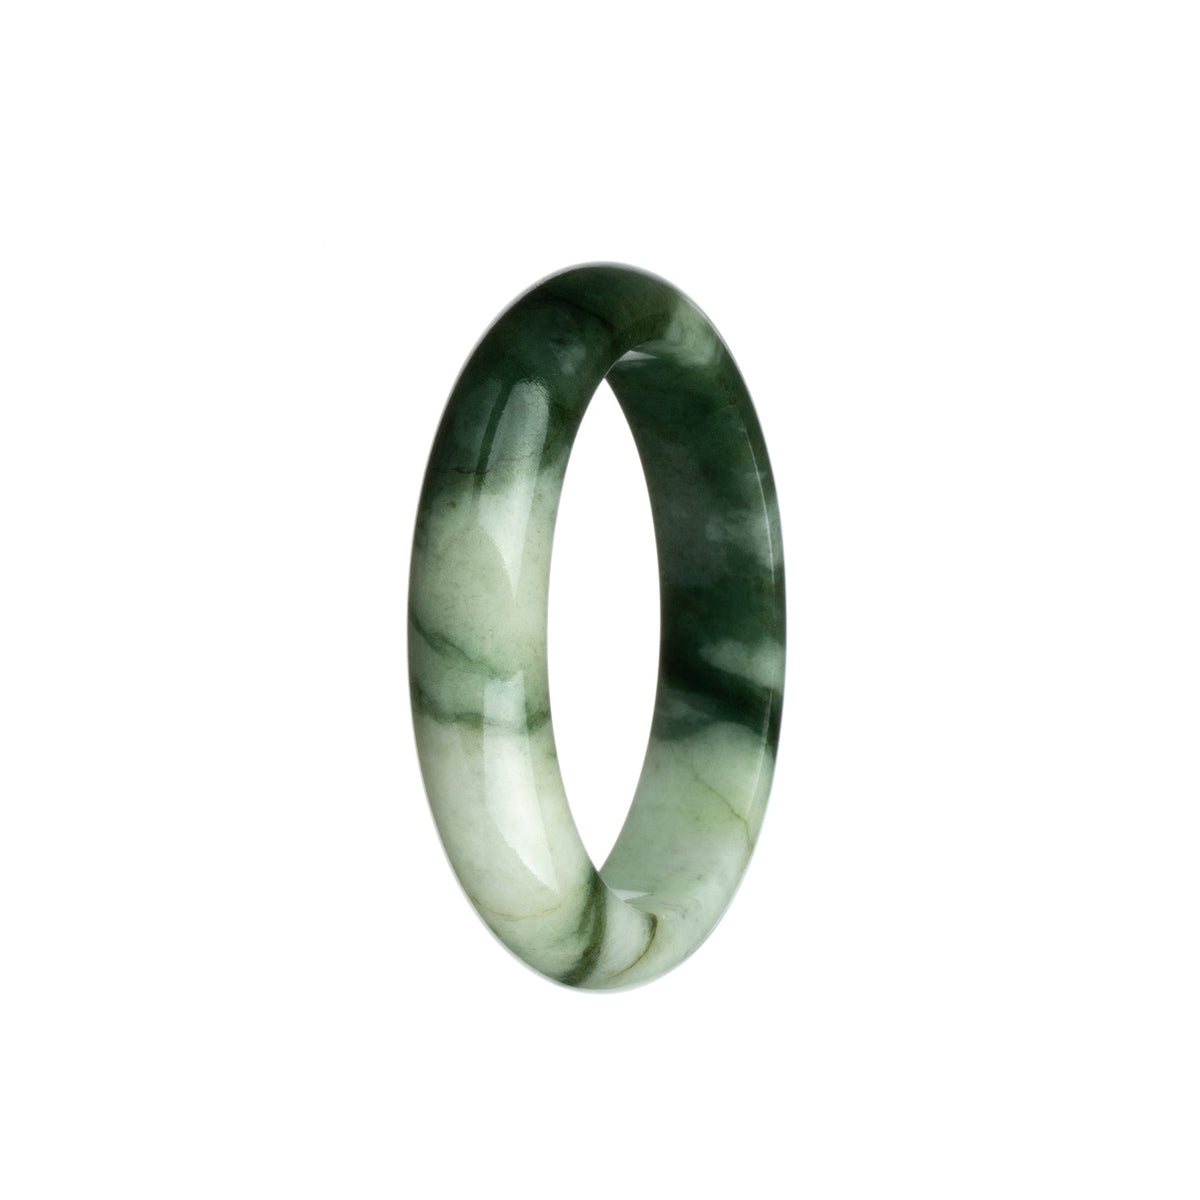 A stunning olive green and white jadeite jade bangle bracelet, certified as Grade A. The bracelet features a 53mm half moon design.